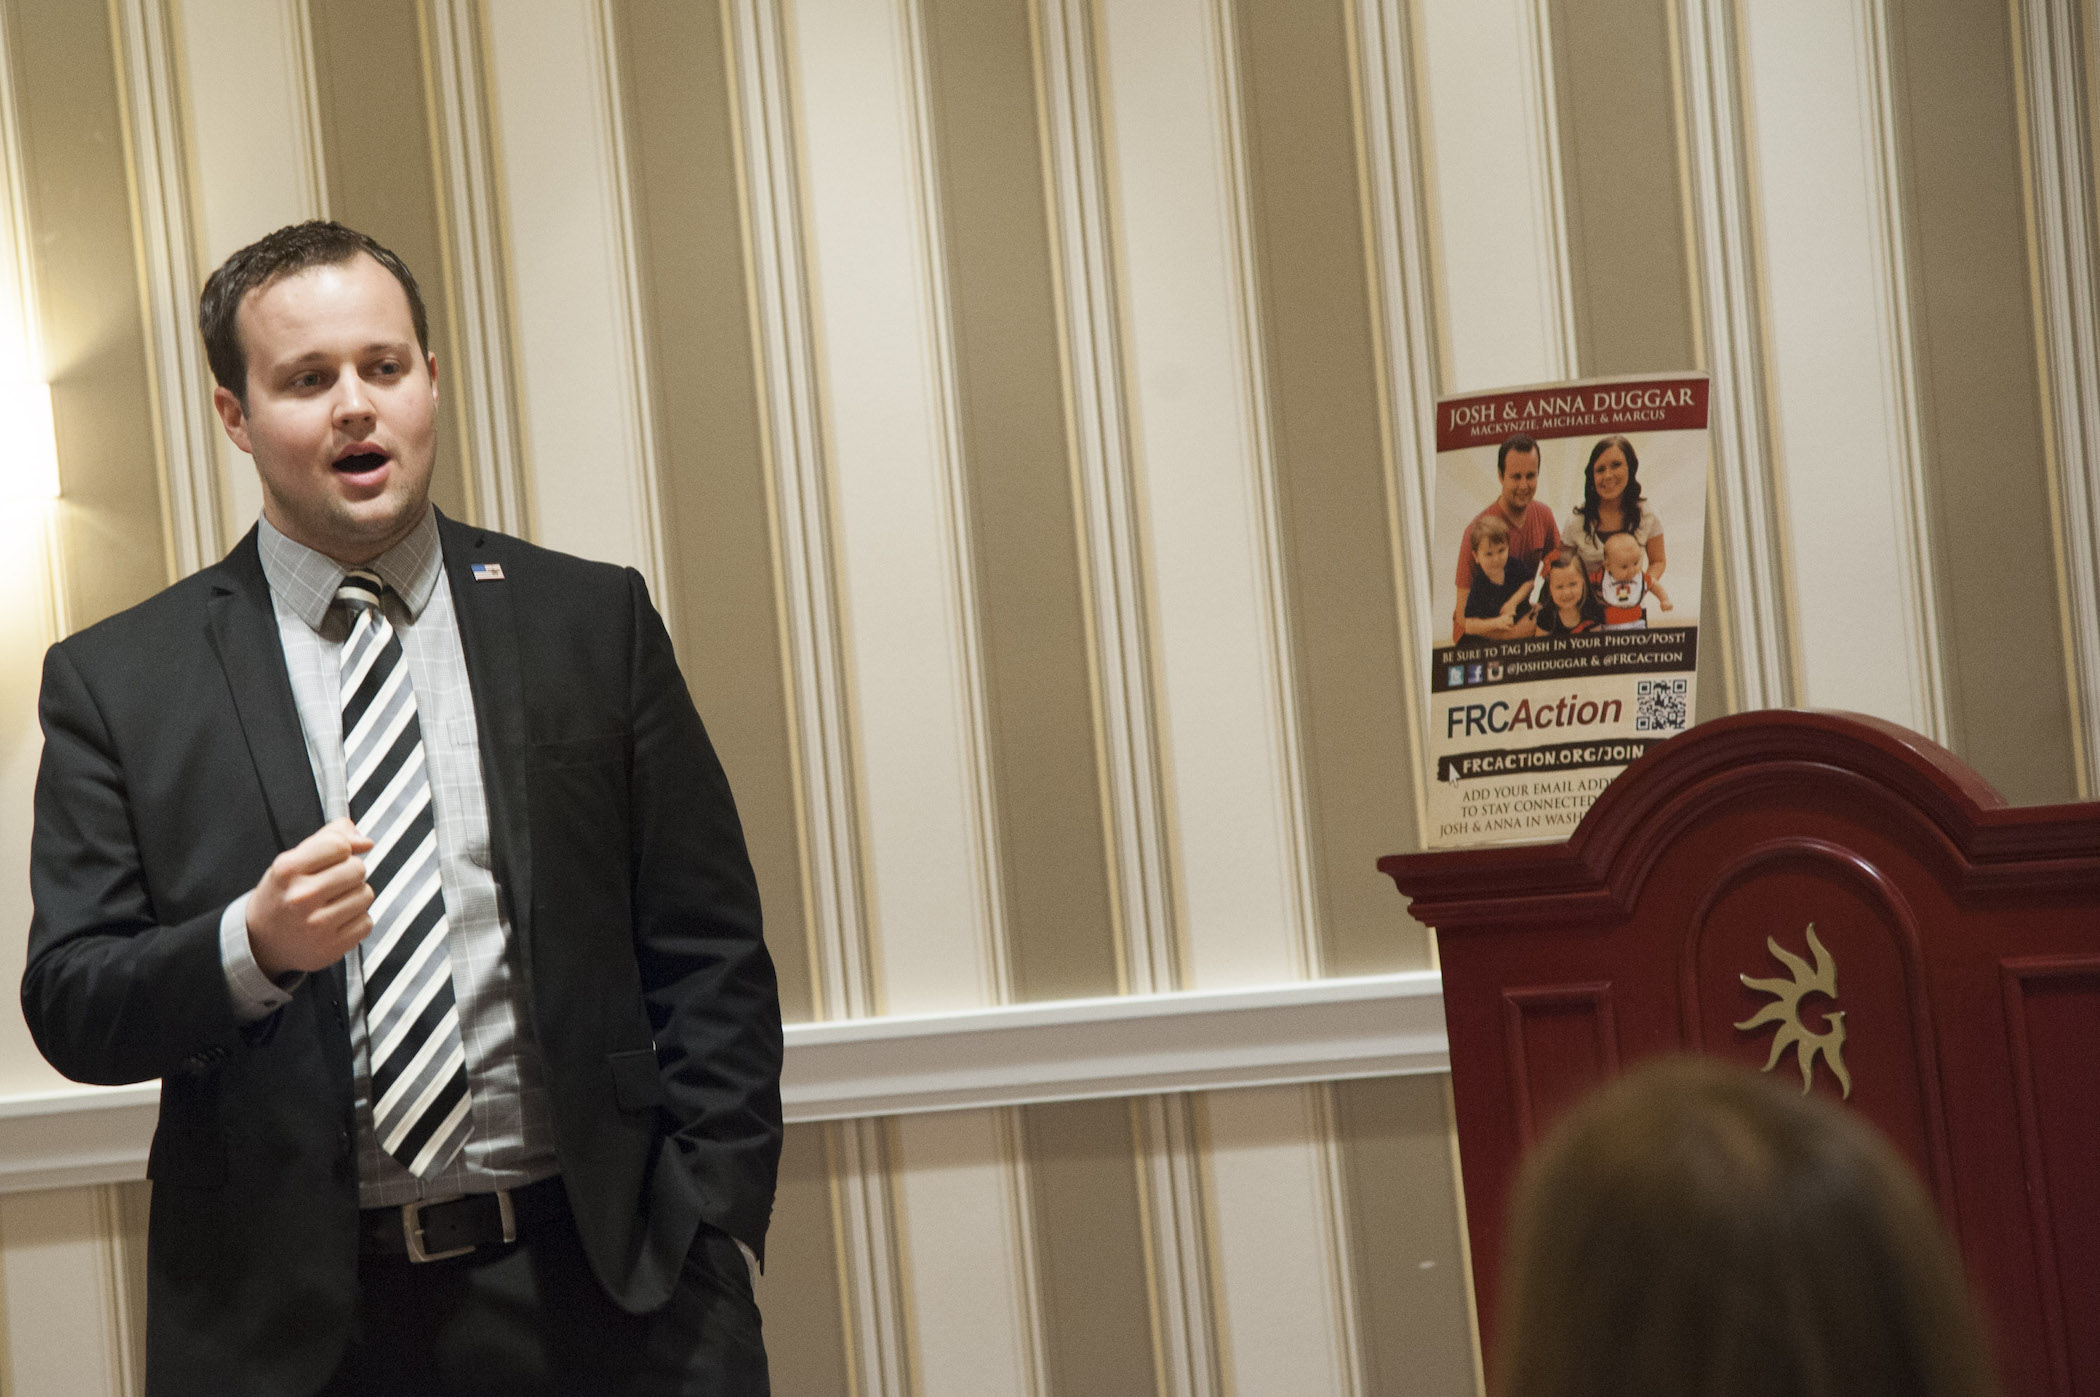 Josh Duggar of the Duggar family speaking at a conference.  Josh Duggar's trial for alleged child sexual abuse material is coming in November 2021